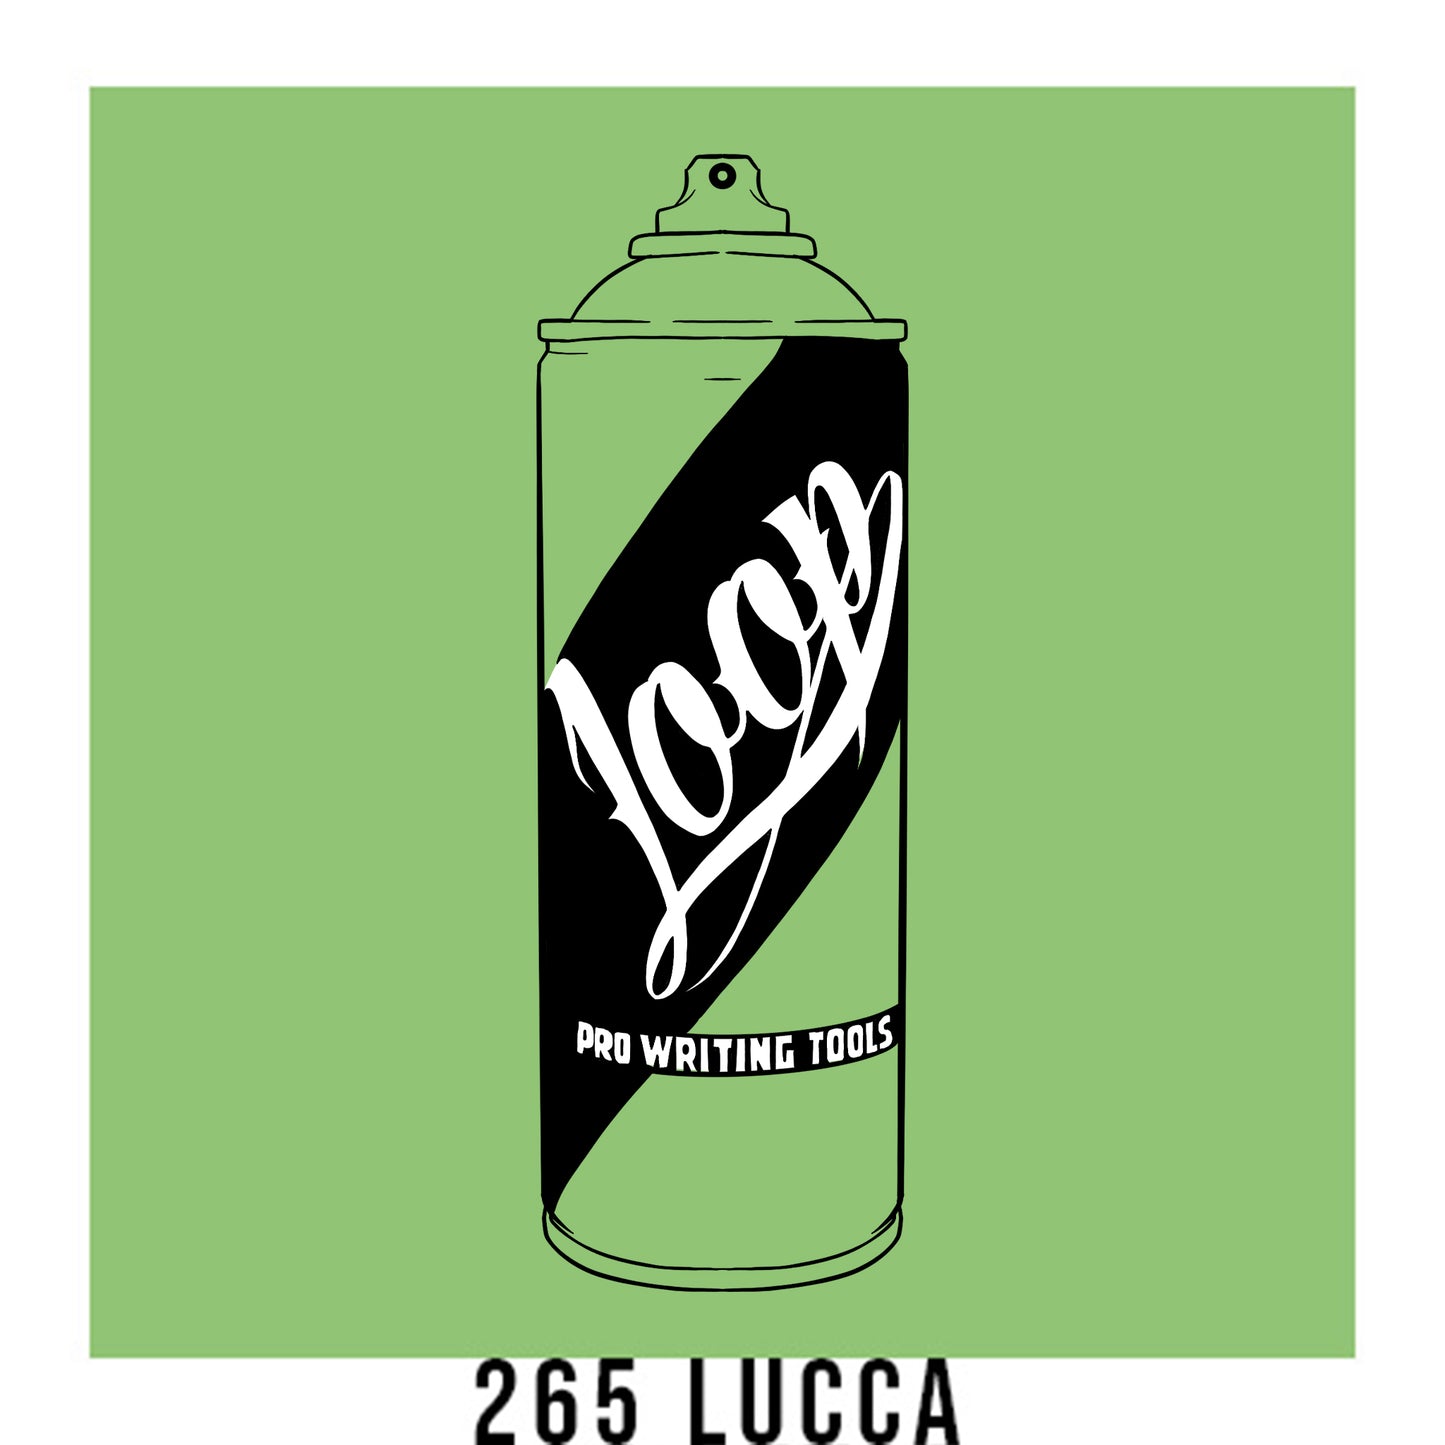 A black outline drawing of a Pastel Green spray paint can with the word "Loop" written on the face in script. The background is a color swatch of the same Pastel Green with a white border with the words "265 Lucca" at the bottom.